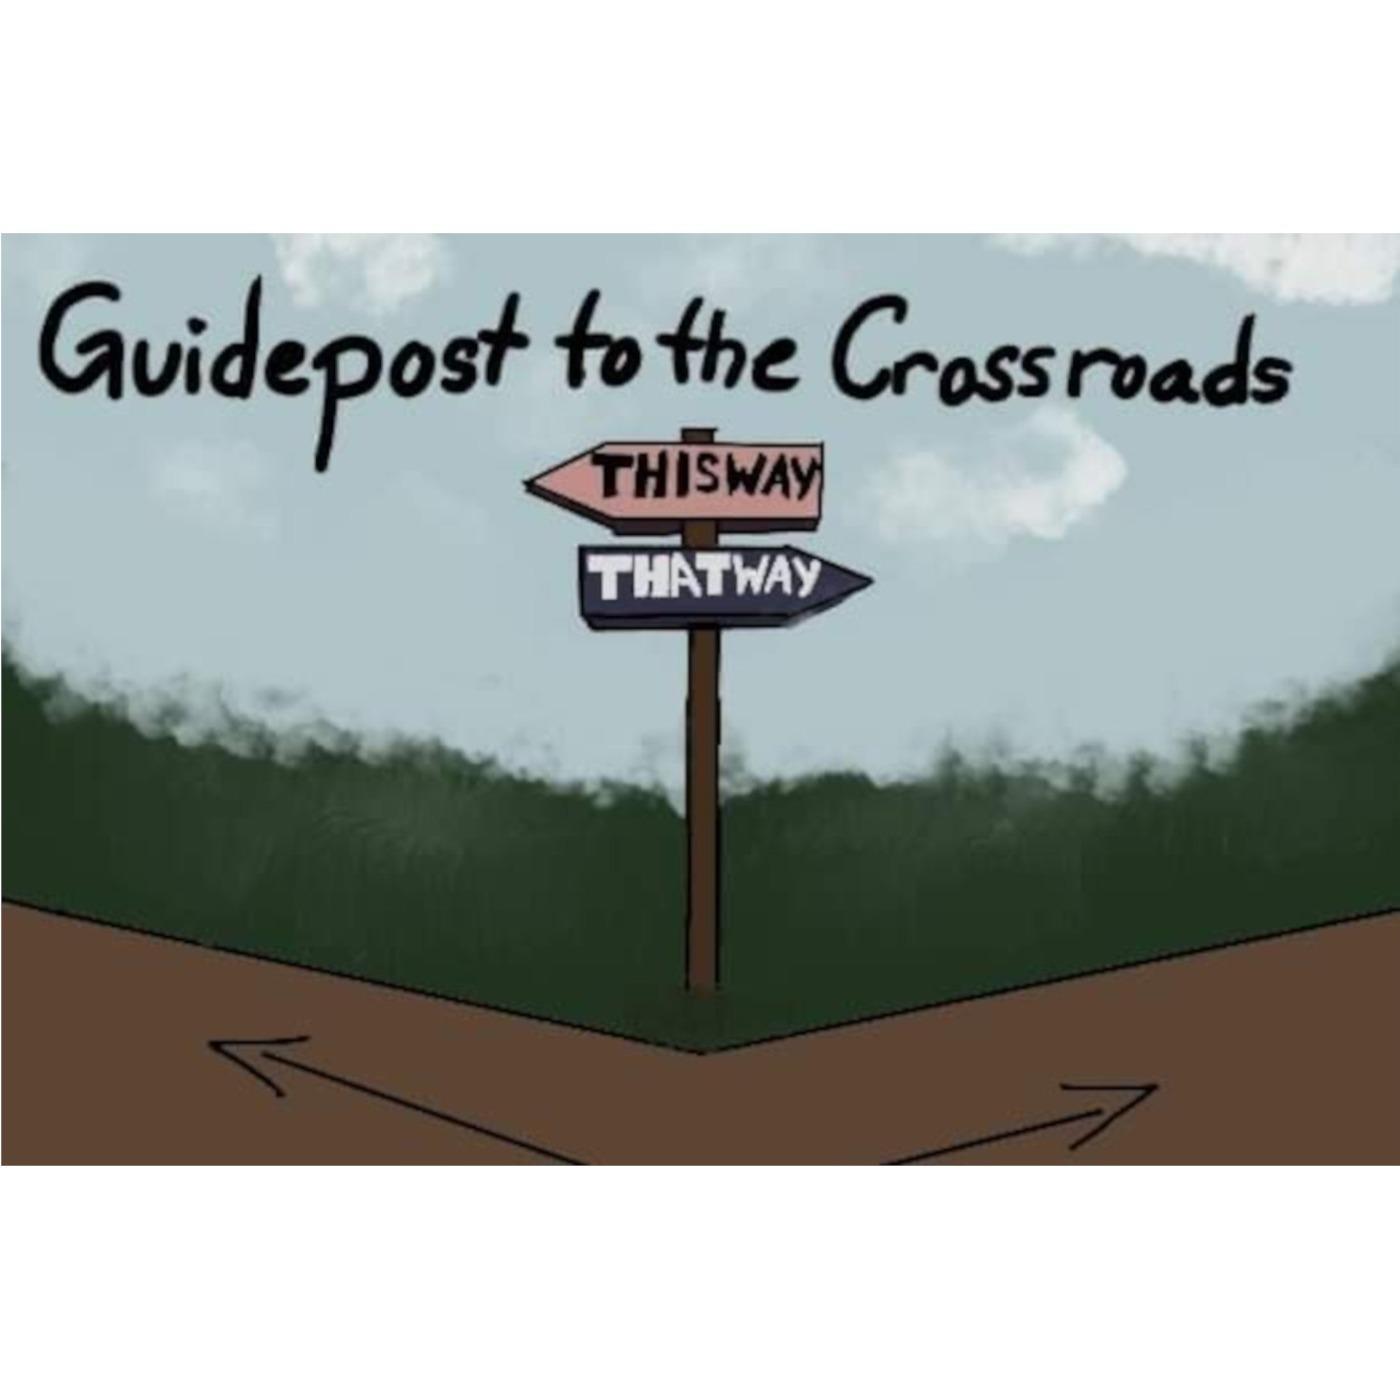 Guide Post To the Crossroads